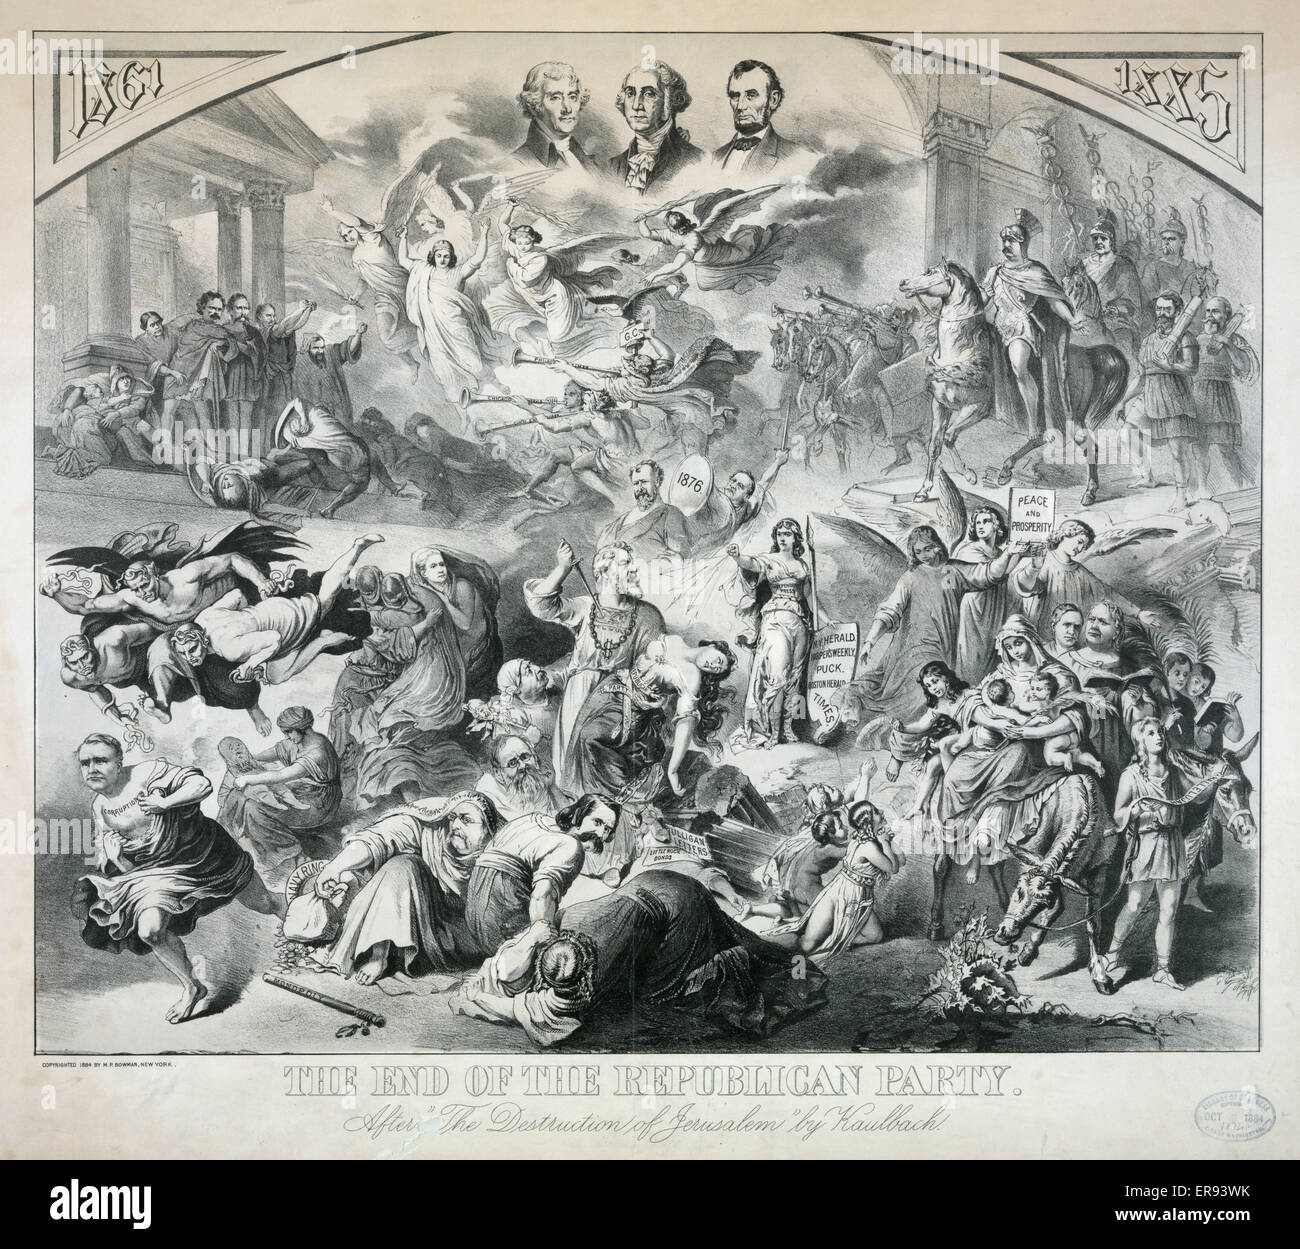 The end of the republican party After The Destruction of Jerusalem by Kaulbach. After a large painting by Wilhelm von Kaulbach showing the destruction of Jerusalem, this print shows the demise of the Republican Party with various Republicans, Mugwumps, De Stock Photo